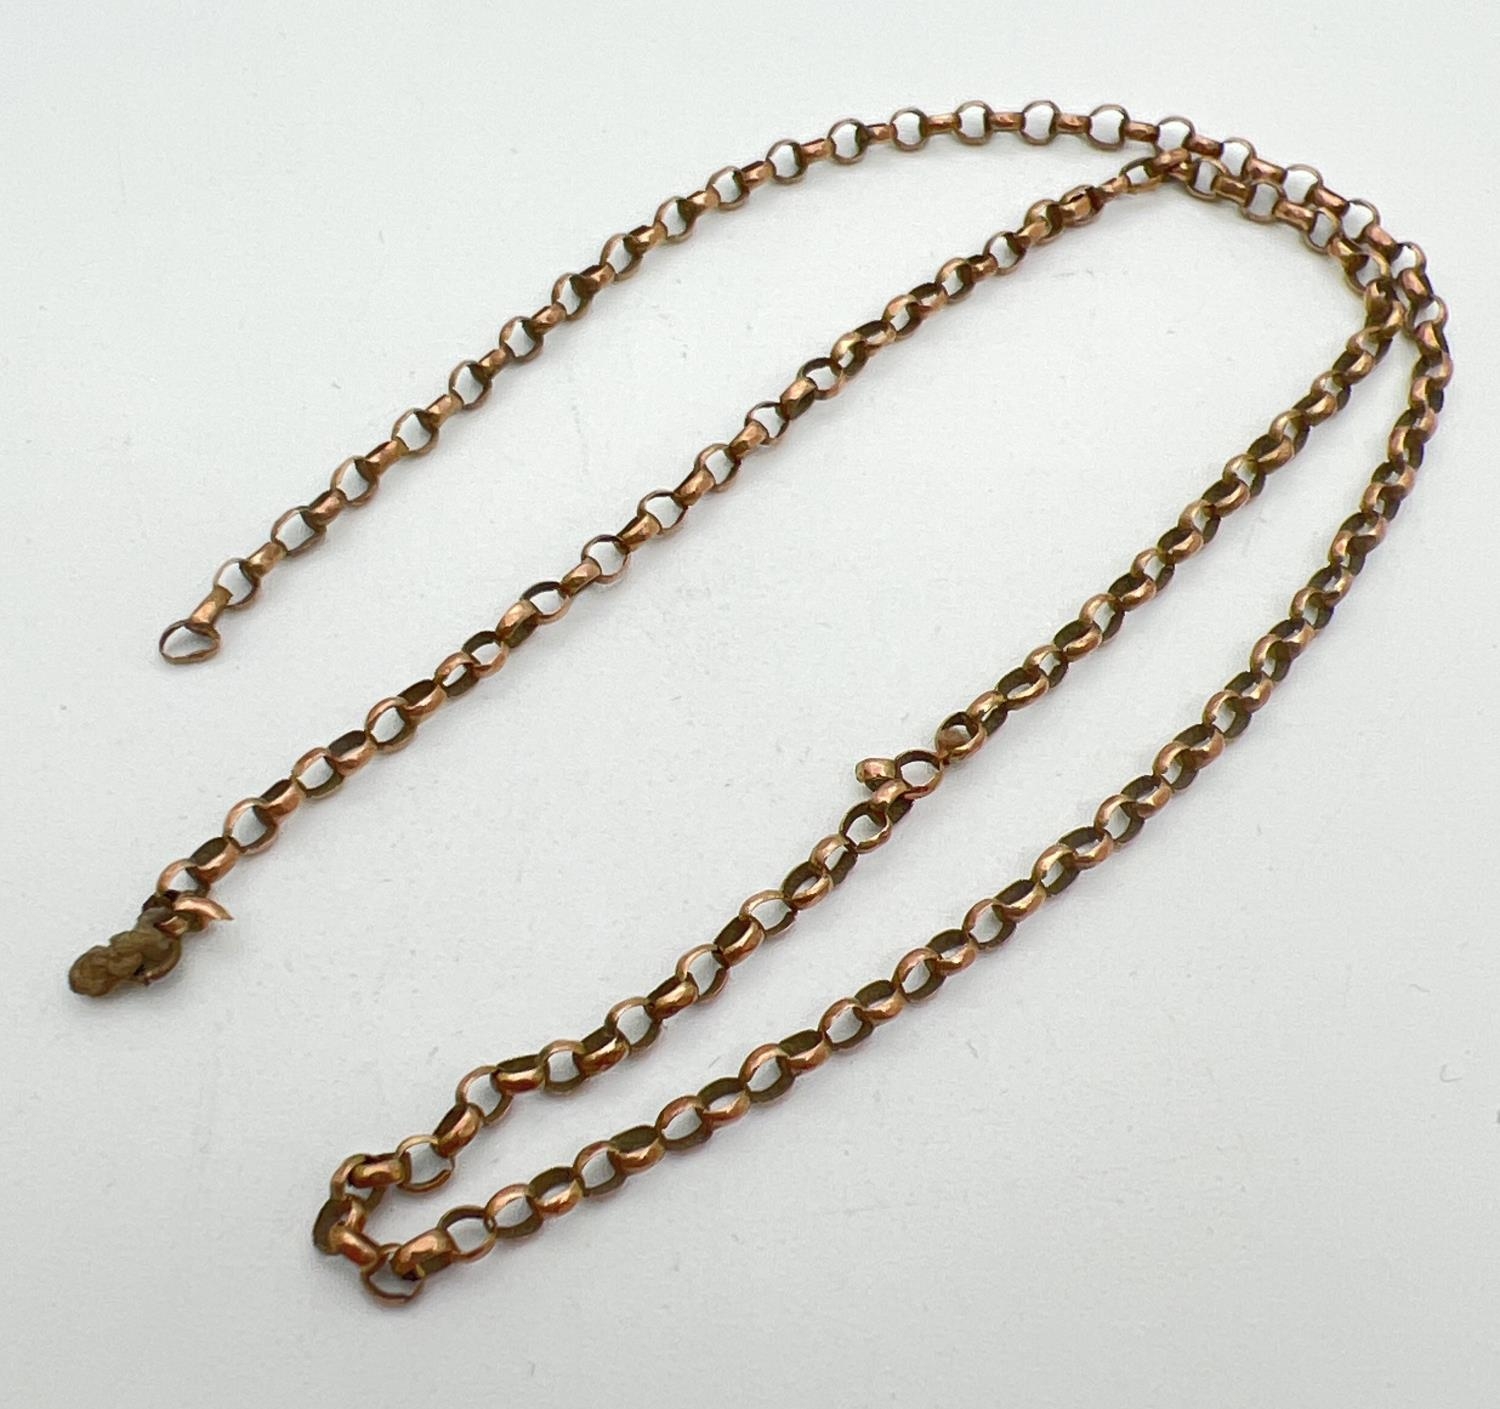 A scrap gold part belcher chain - tests as 9ct gold. Total weight approx. 2.6g.